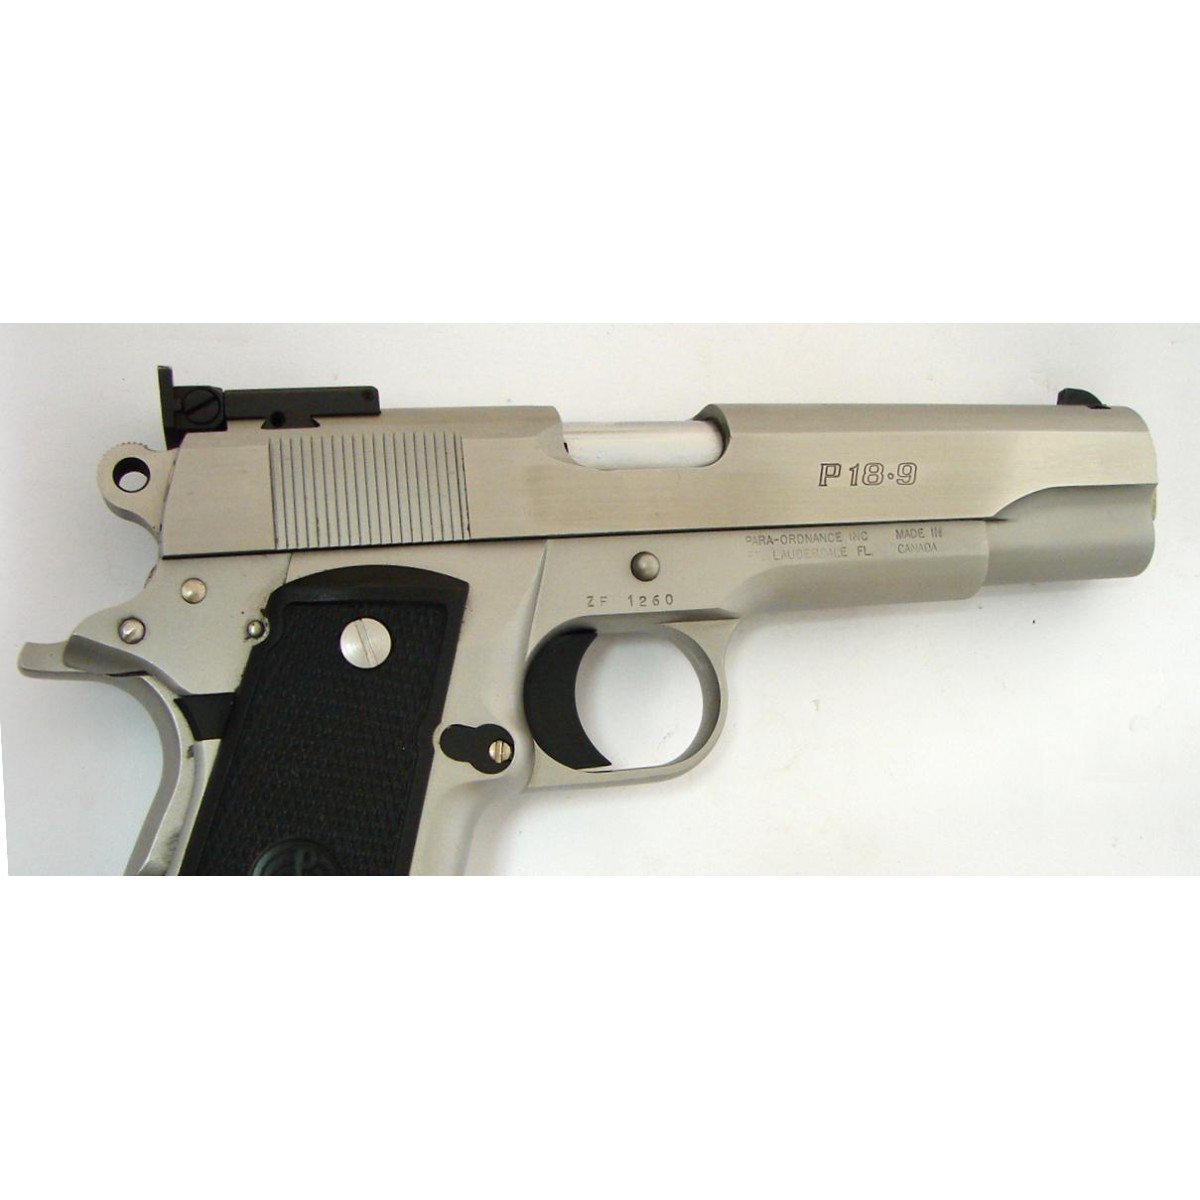 Para Model P18-9 Stainless 9 mm